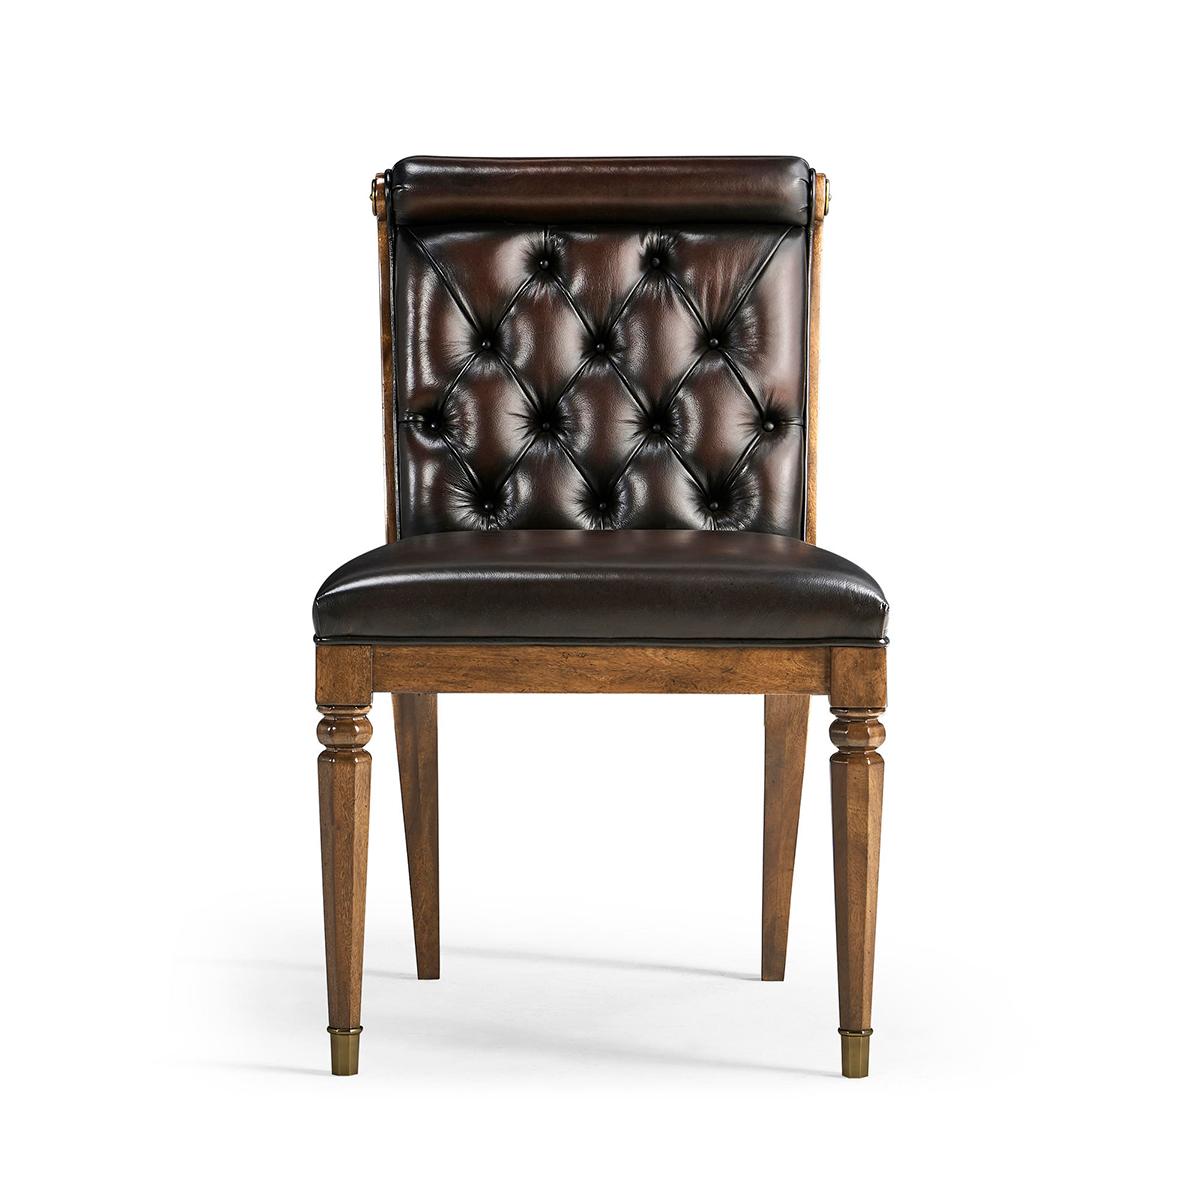 This chair is masterfully crafted from the finest materials, featuring hand-glazed antique leather upholstery that brings a vintage charm and a deep sense of history to any room.

The chair has a durable mahogany frame, soft foam cushioning, and